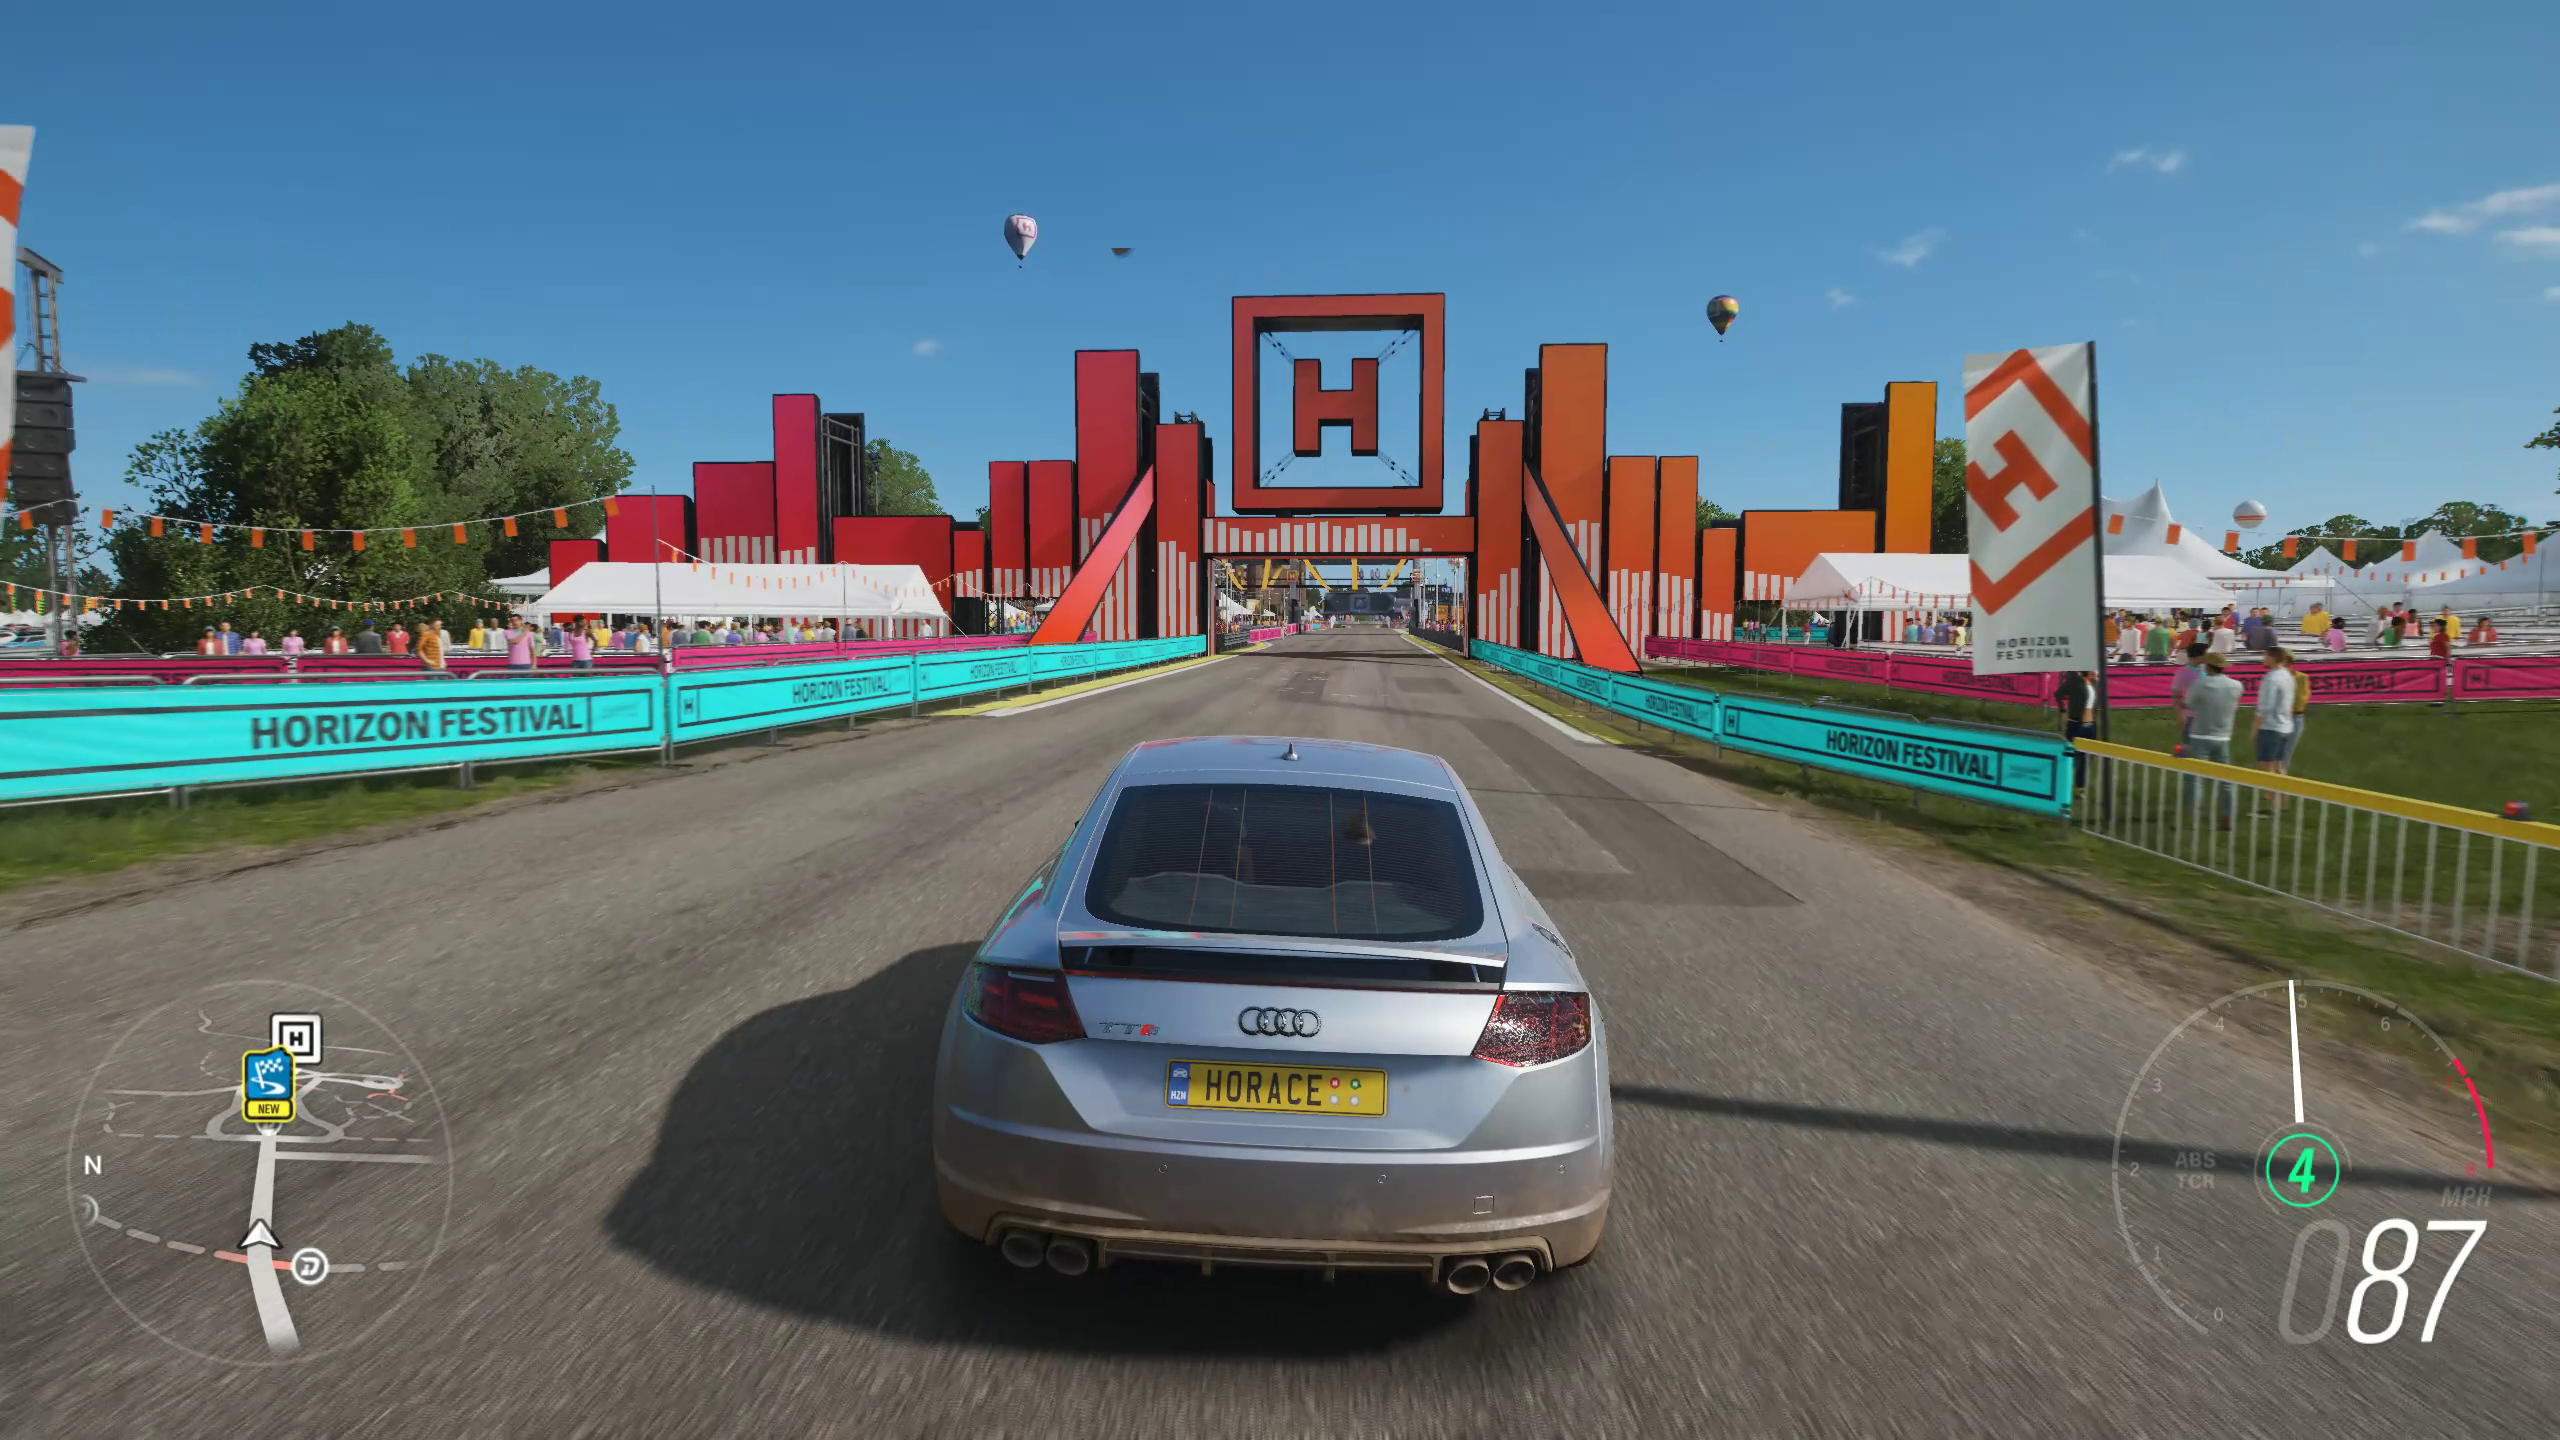 how to save game in forza horizon 4 demo